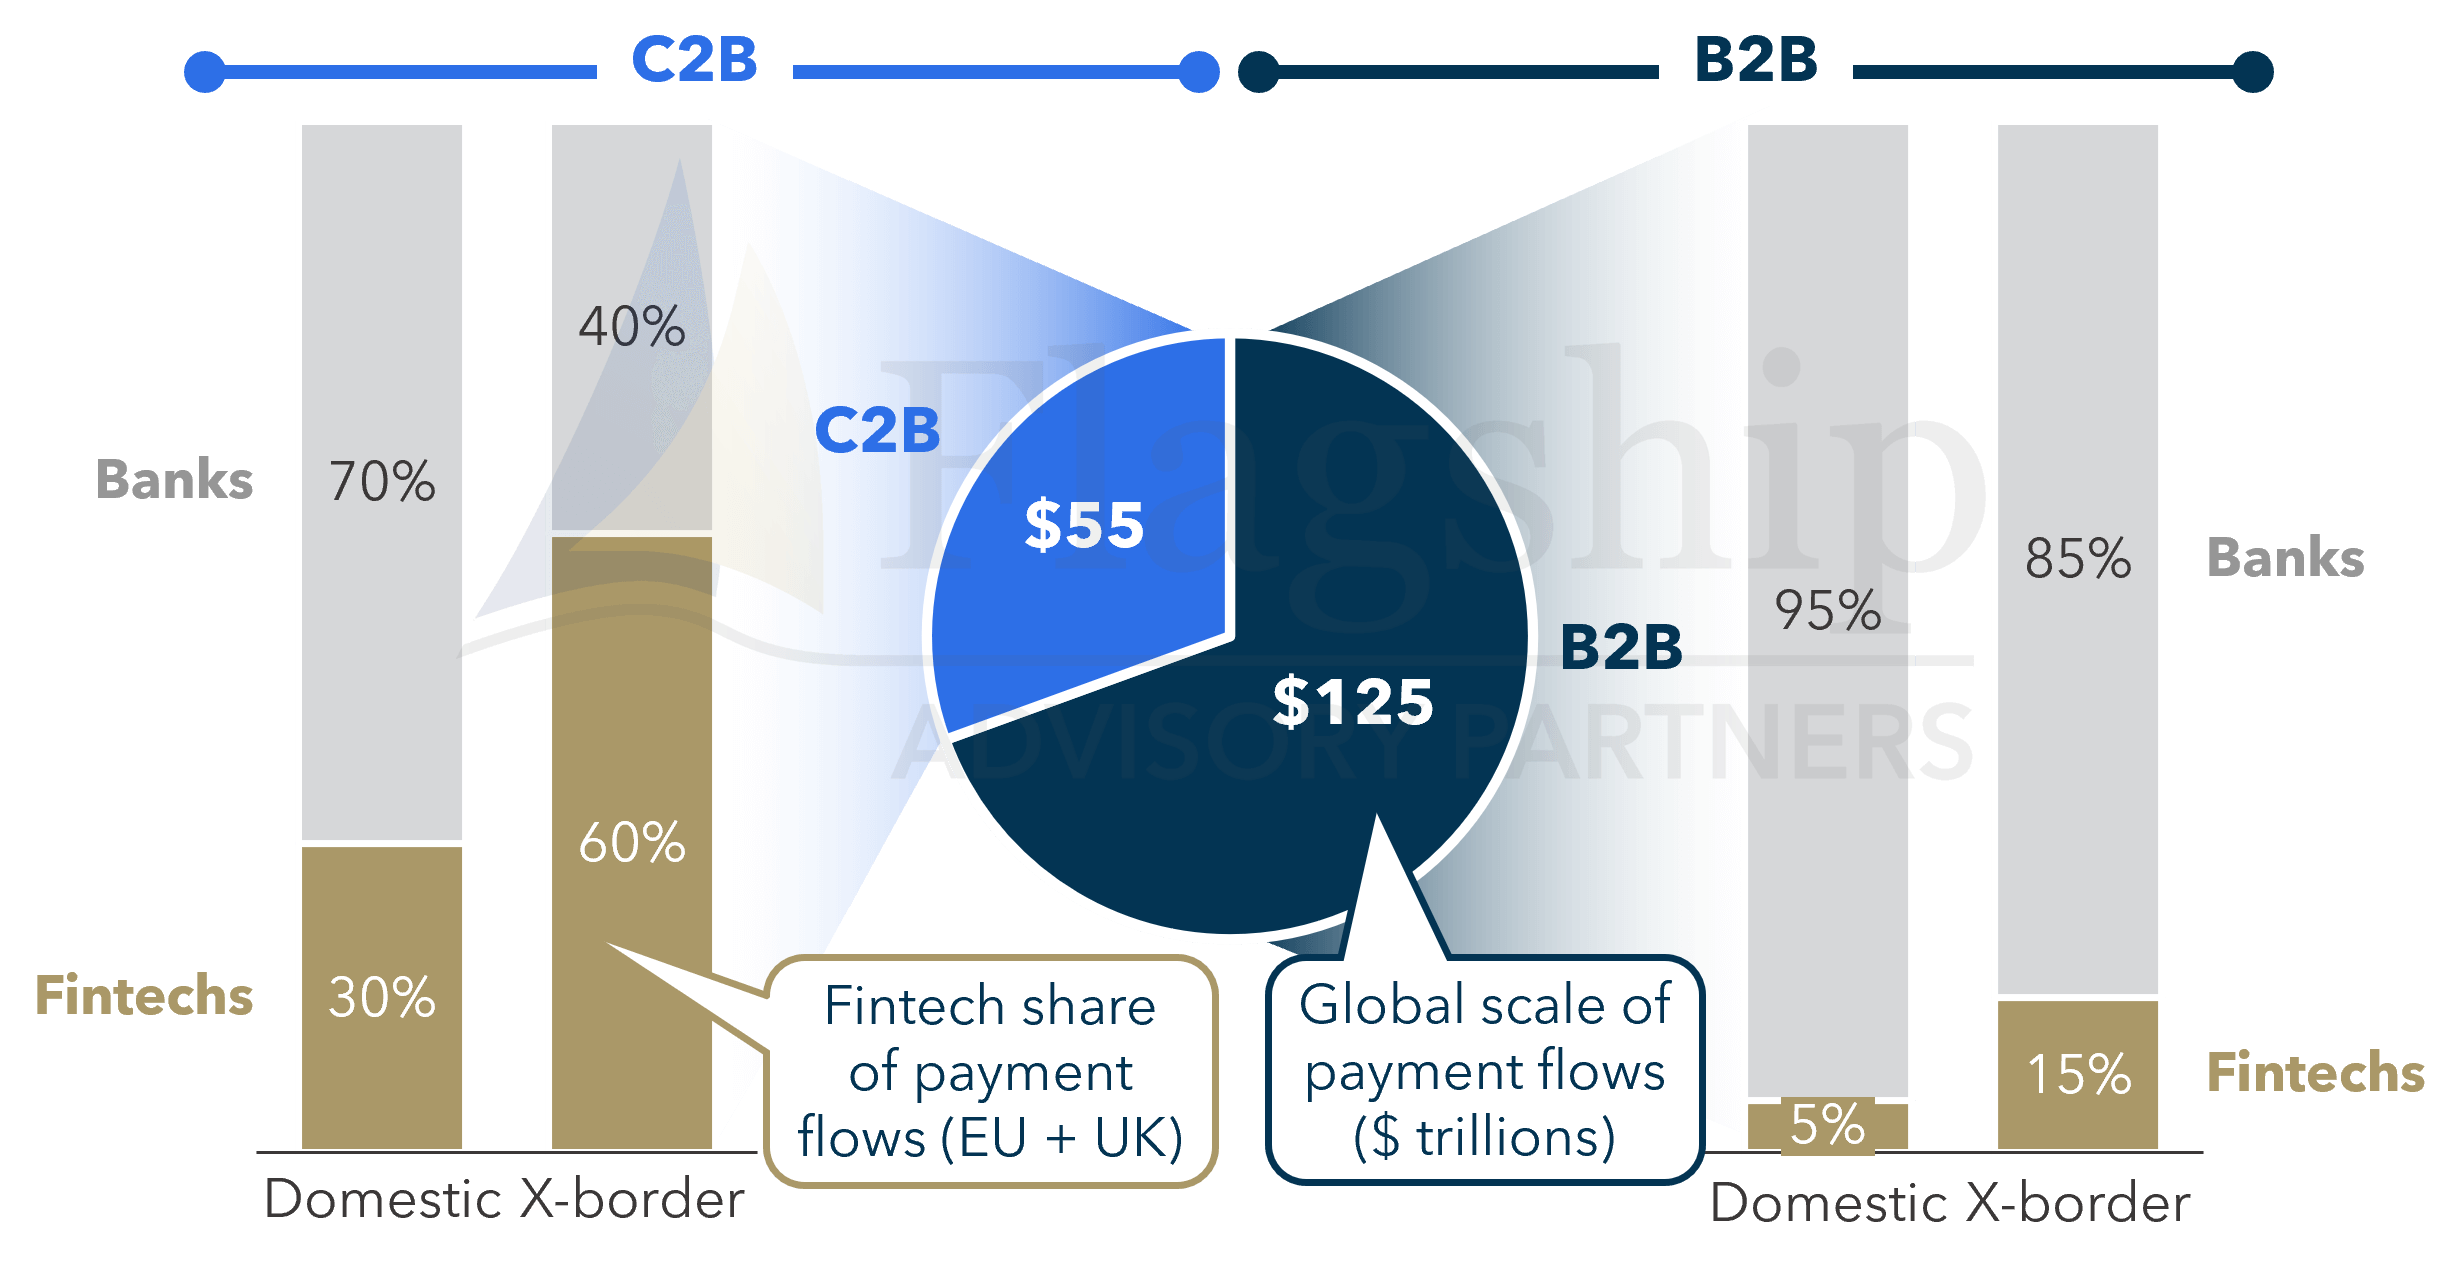 Scale of global payments (B2B vs. C2B), share of flows owned by fintech 